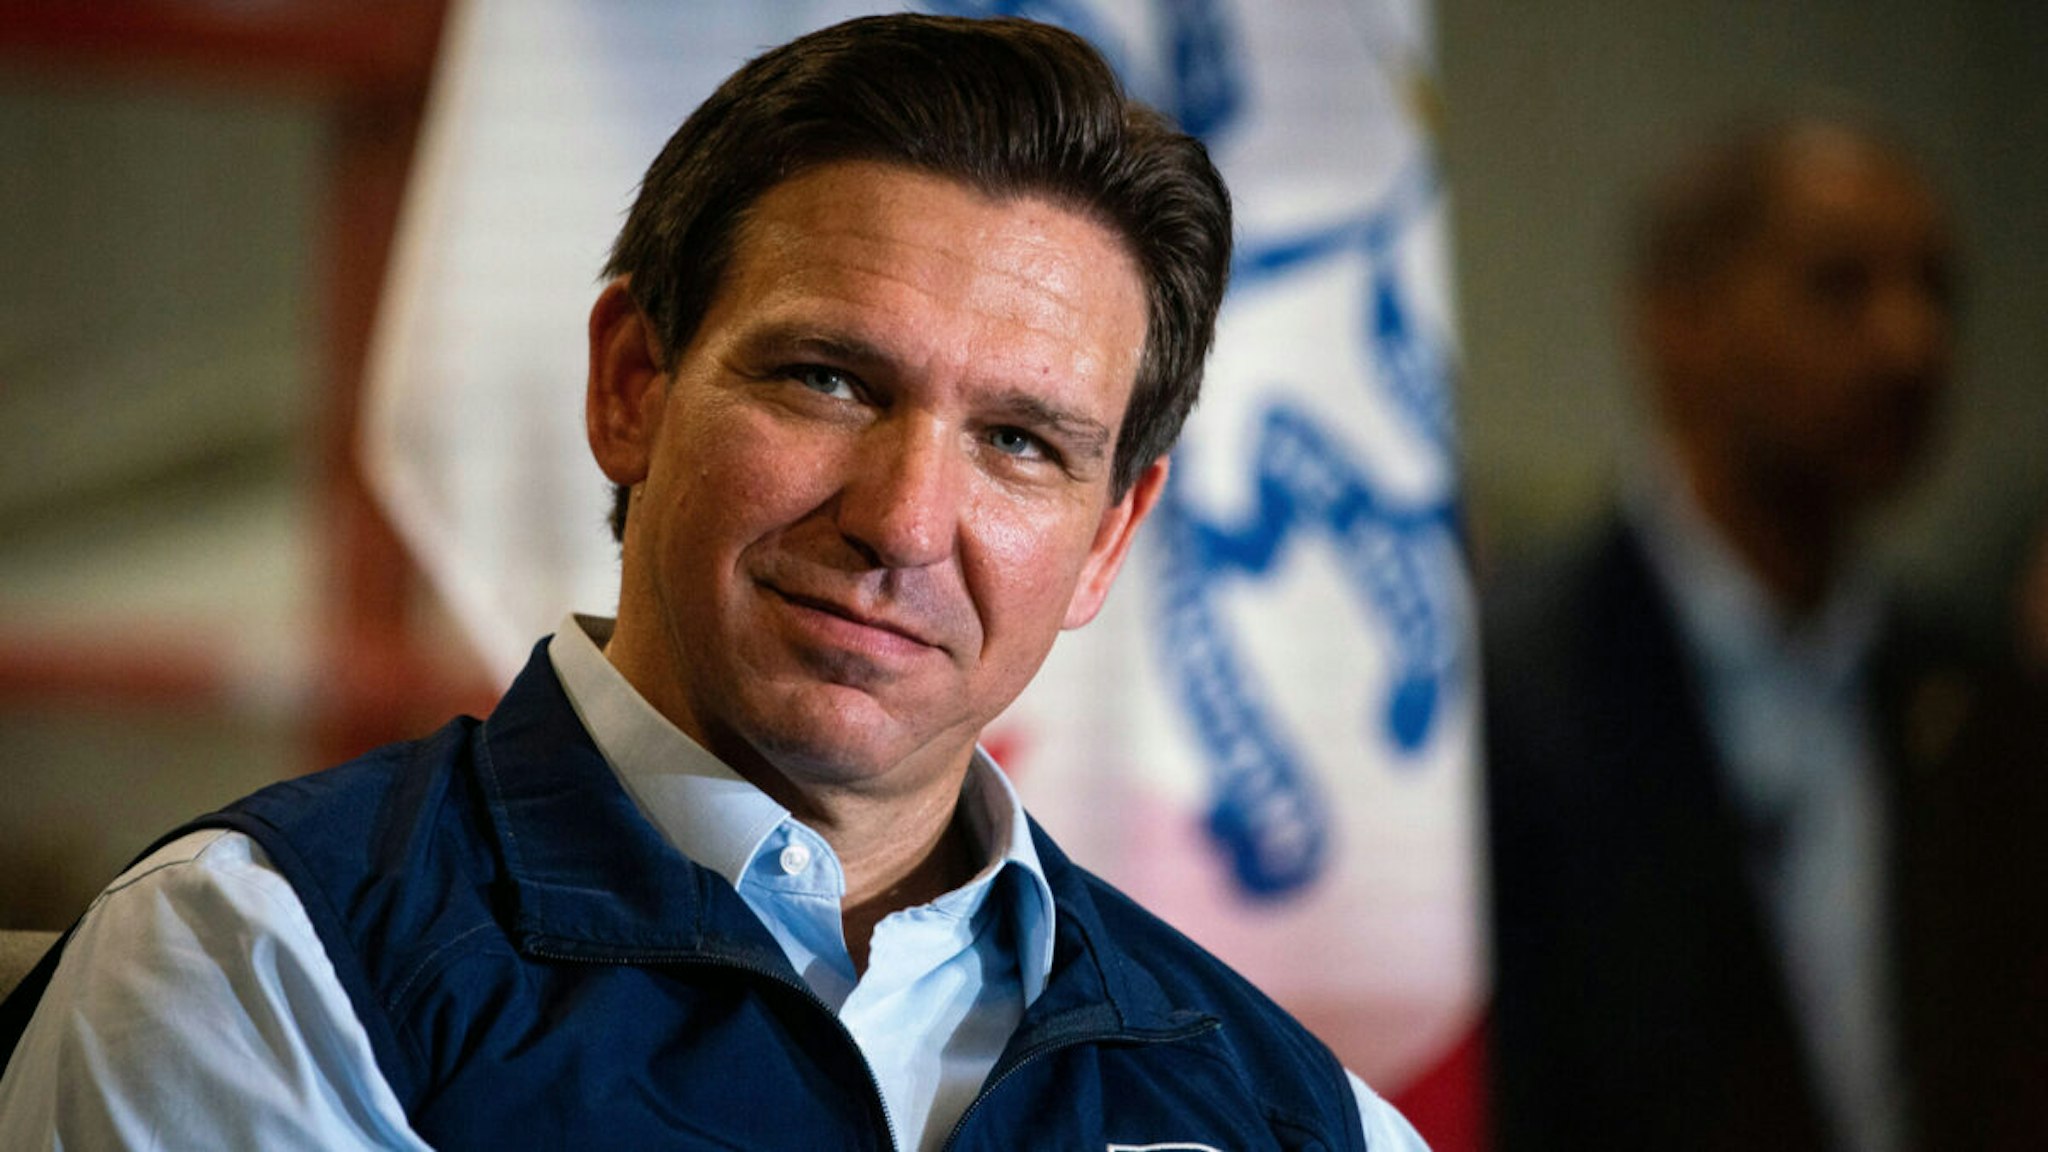 Ron DeSantis, governor of Florida, during a campaign event at Port Neal Welding in Salix, Iowa, US, on Wednesday, May 31, 2023. DeSantis is kicking off his 2024 Republican presidential campaign this week with a trip to early voting states where he must prove that he can engage in the retail politics necessary to attract primary voters and show he's a credible alternative to Donald Trump.